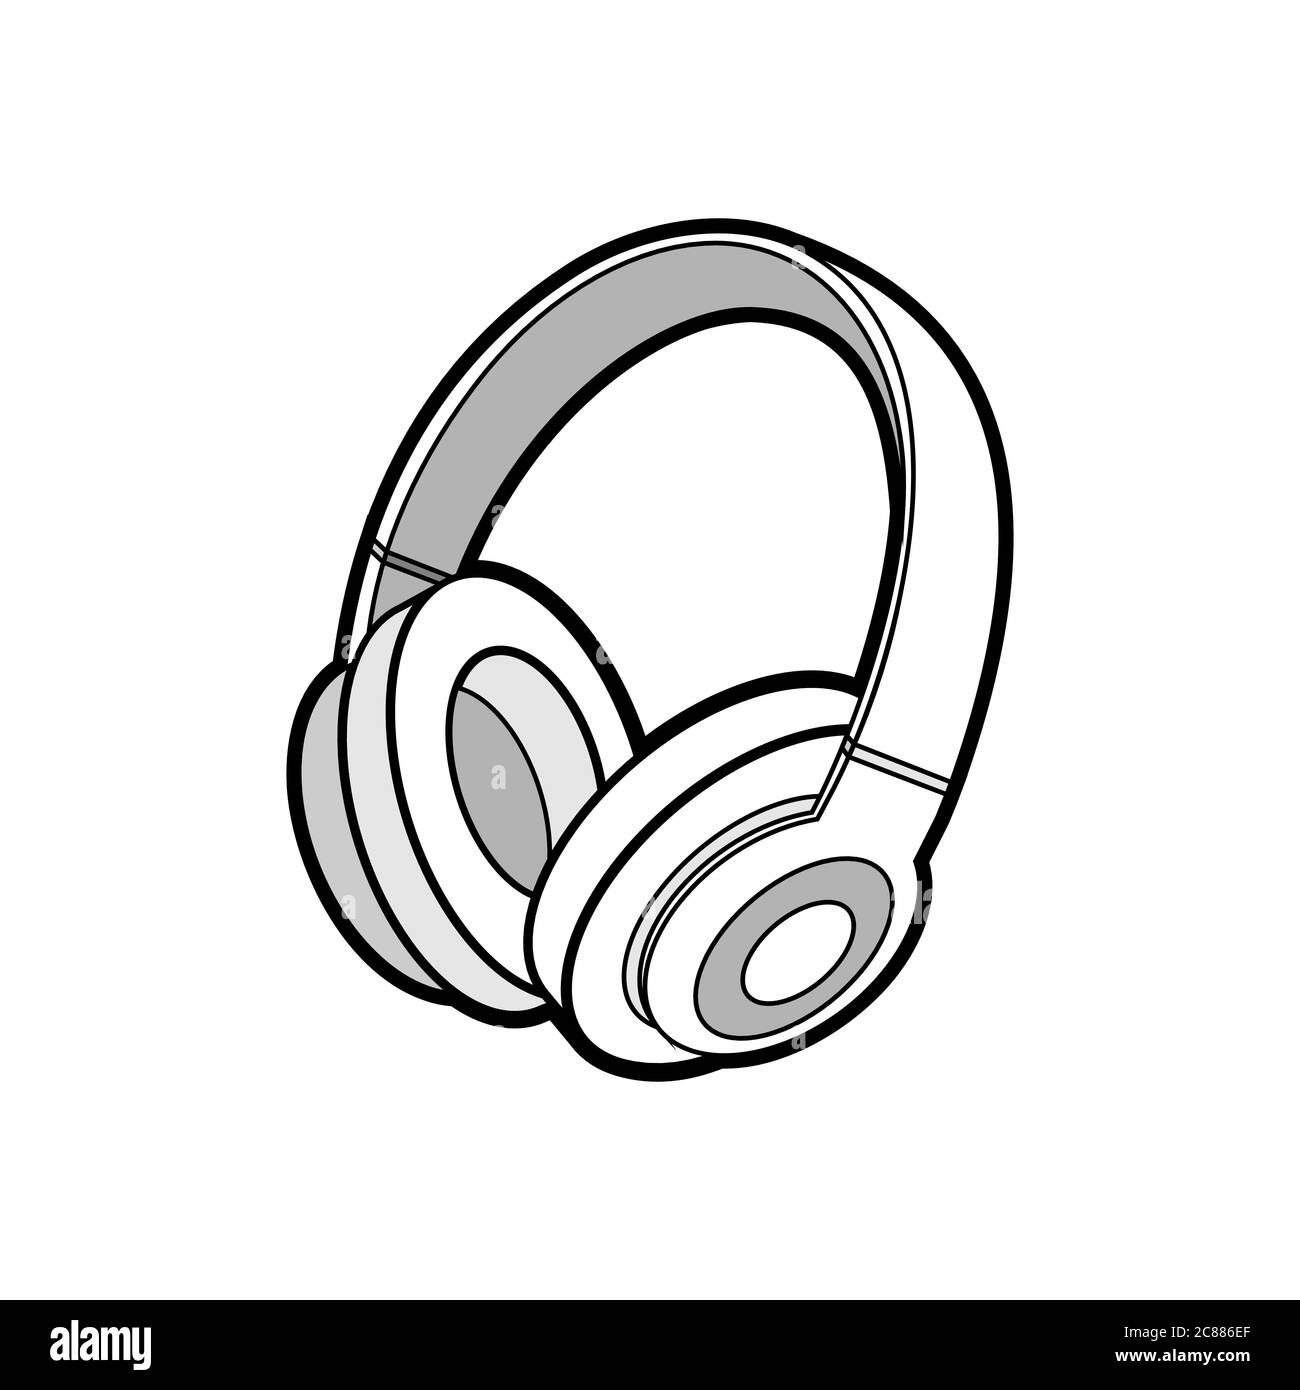 Headphones wireless white vector isolated. Youth fashion hipster cool headphones illustration minimalist style. Stock Vector